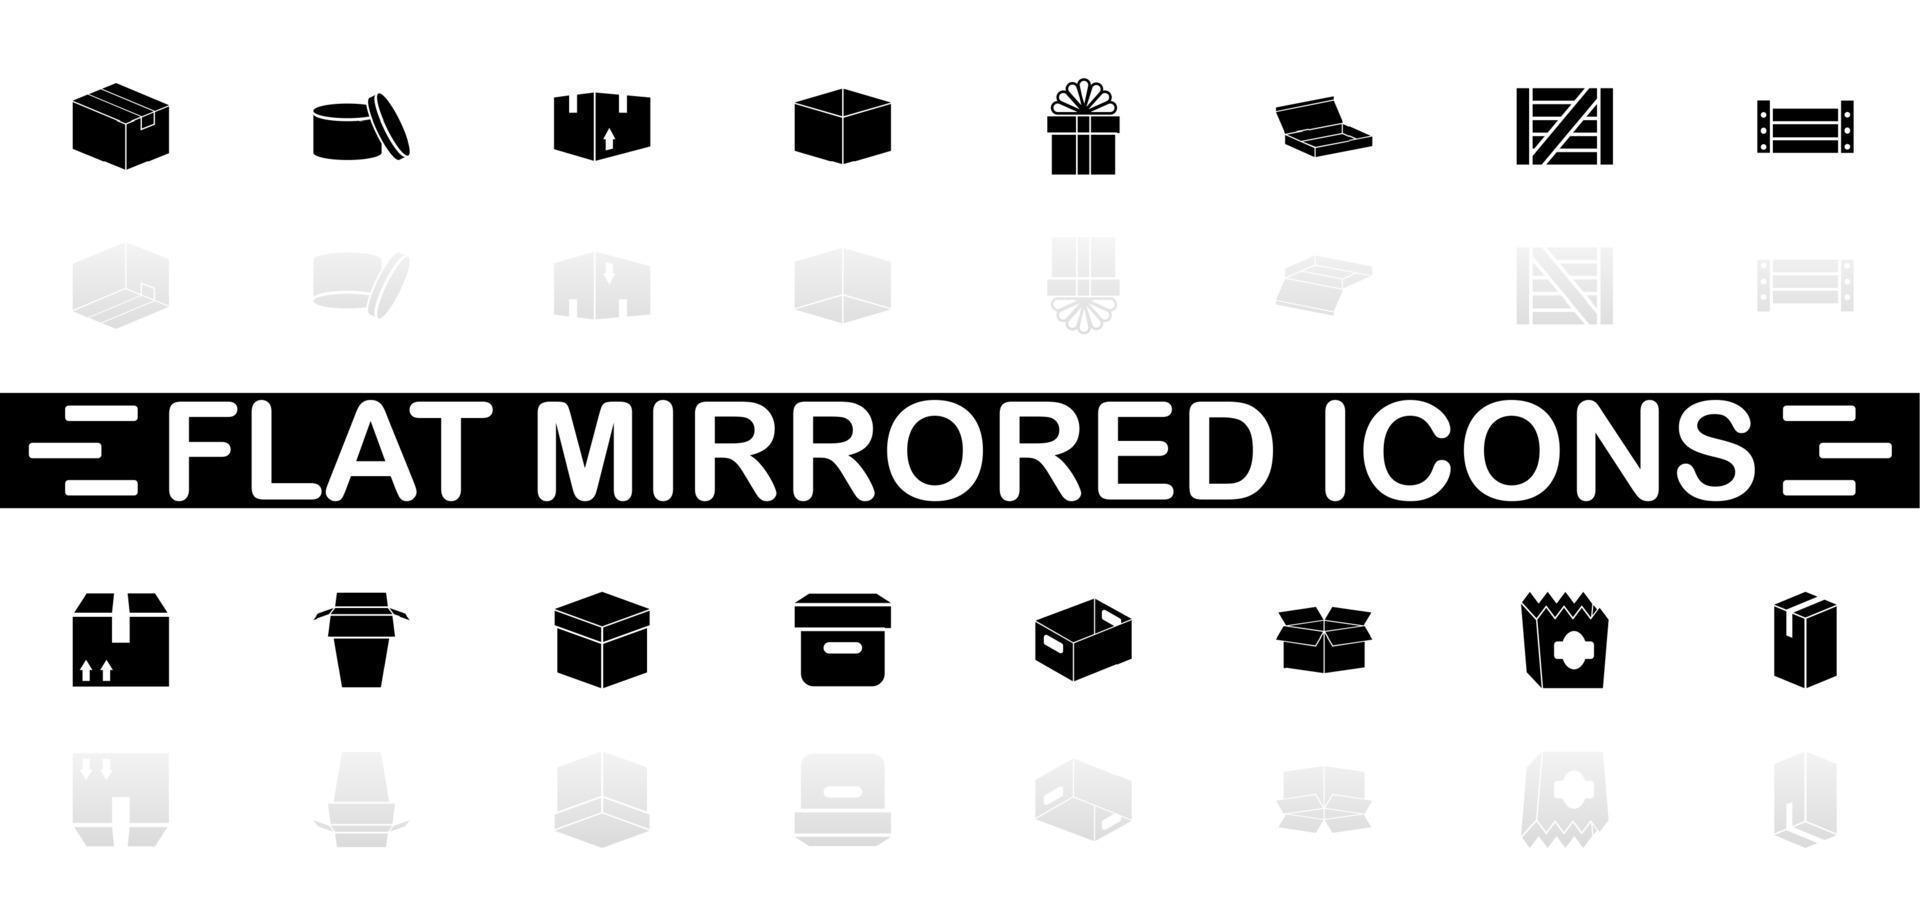 Box and Crates icons - Black symbol on white background. Simple illustration. Flat Vector Icon. Mirror Reflection Shadow. Can be used in logo, web, mobile and UI UX project.